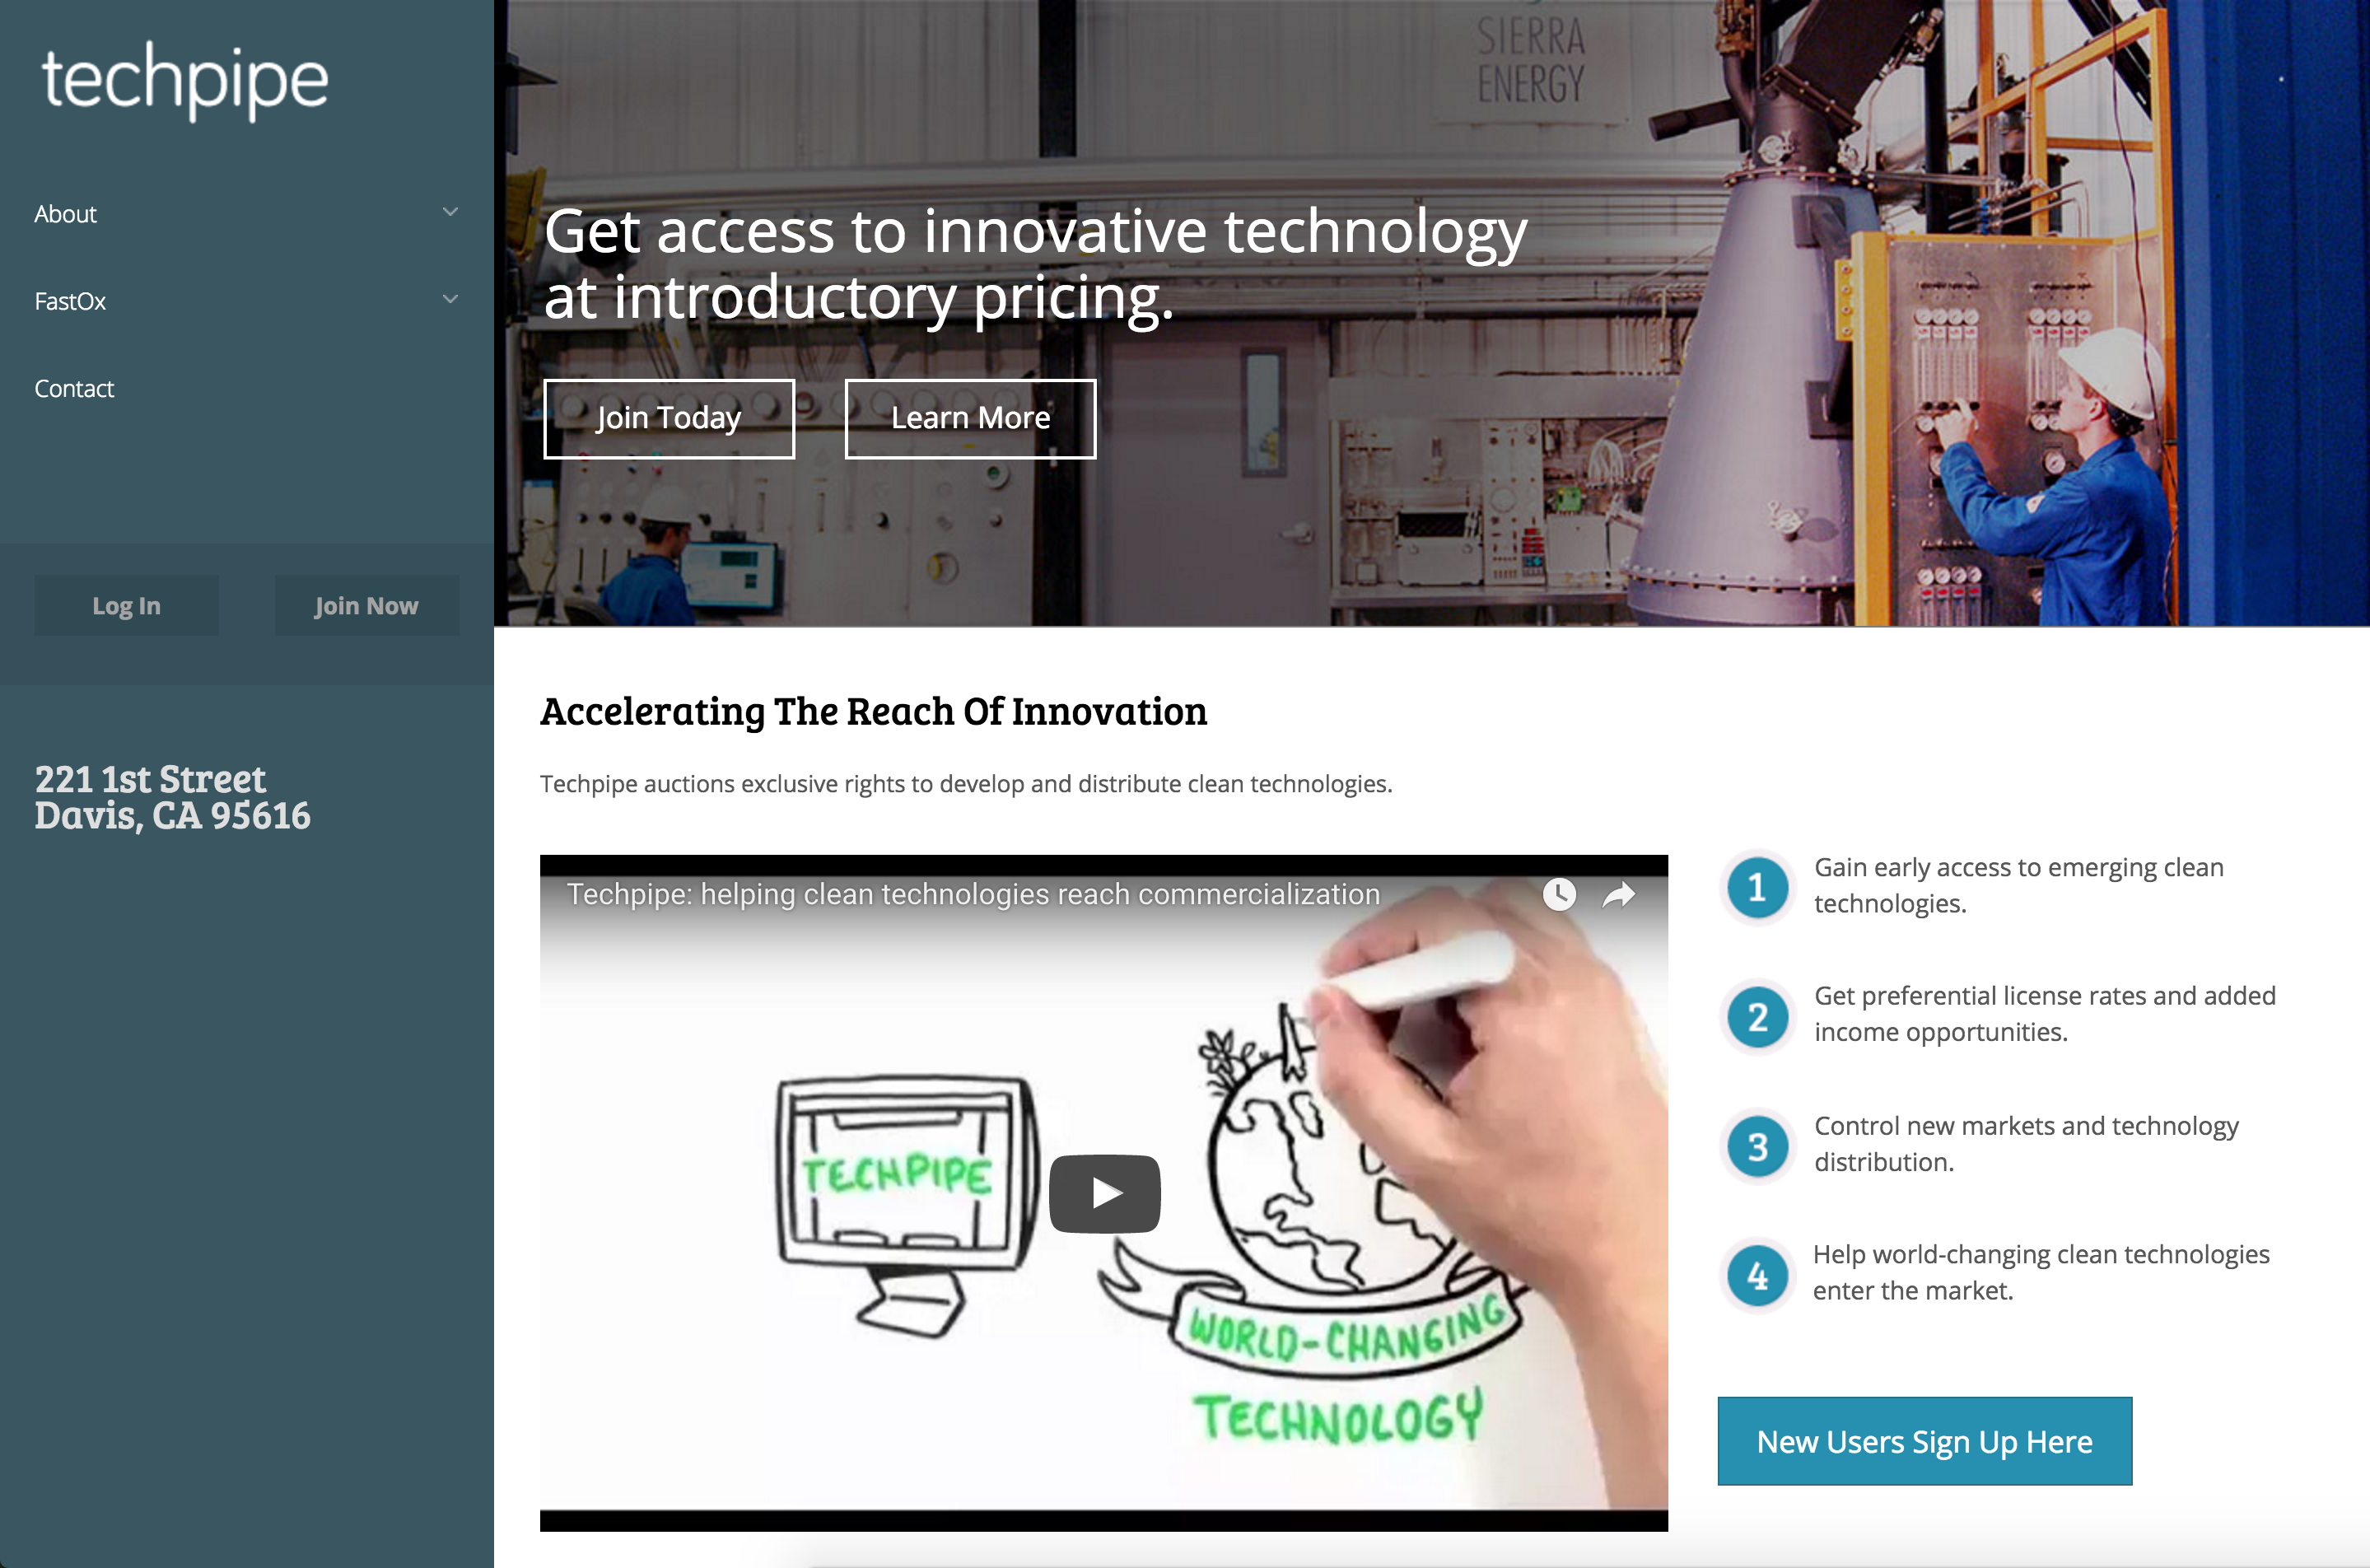 Techpipe.com is an online platform built to help emerging green tech fund their commercialization. The current homepage is designed for a niche audience, and makes it potentially hard for the user to understand who should sign up, what to do, and why.